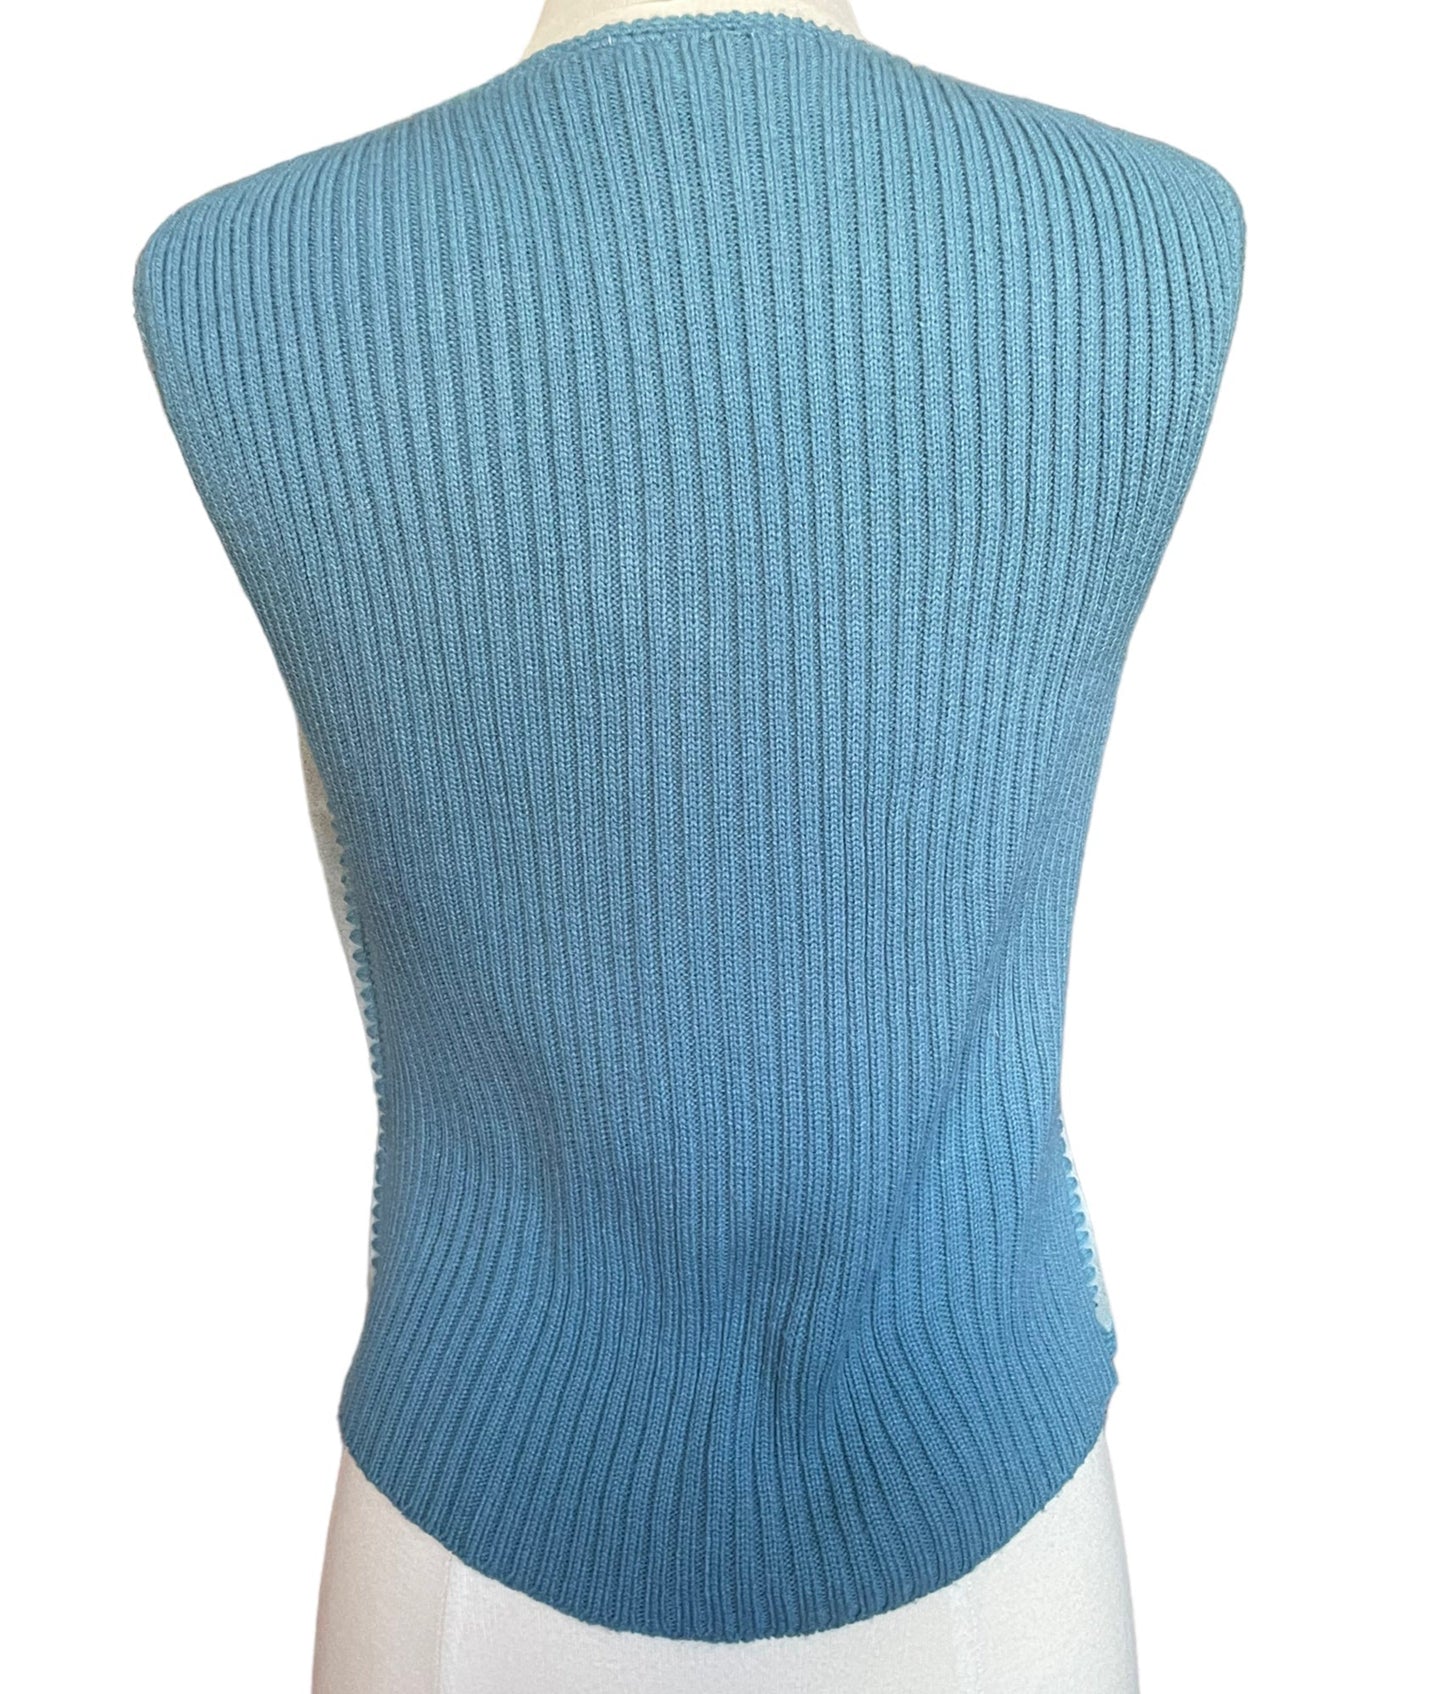 Full back view of Vintage 1970s Suede Sweater Vest | Seattle True Vintage | Ladies Sweaters and Tops